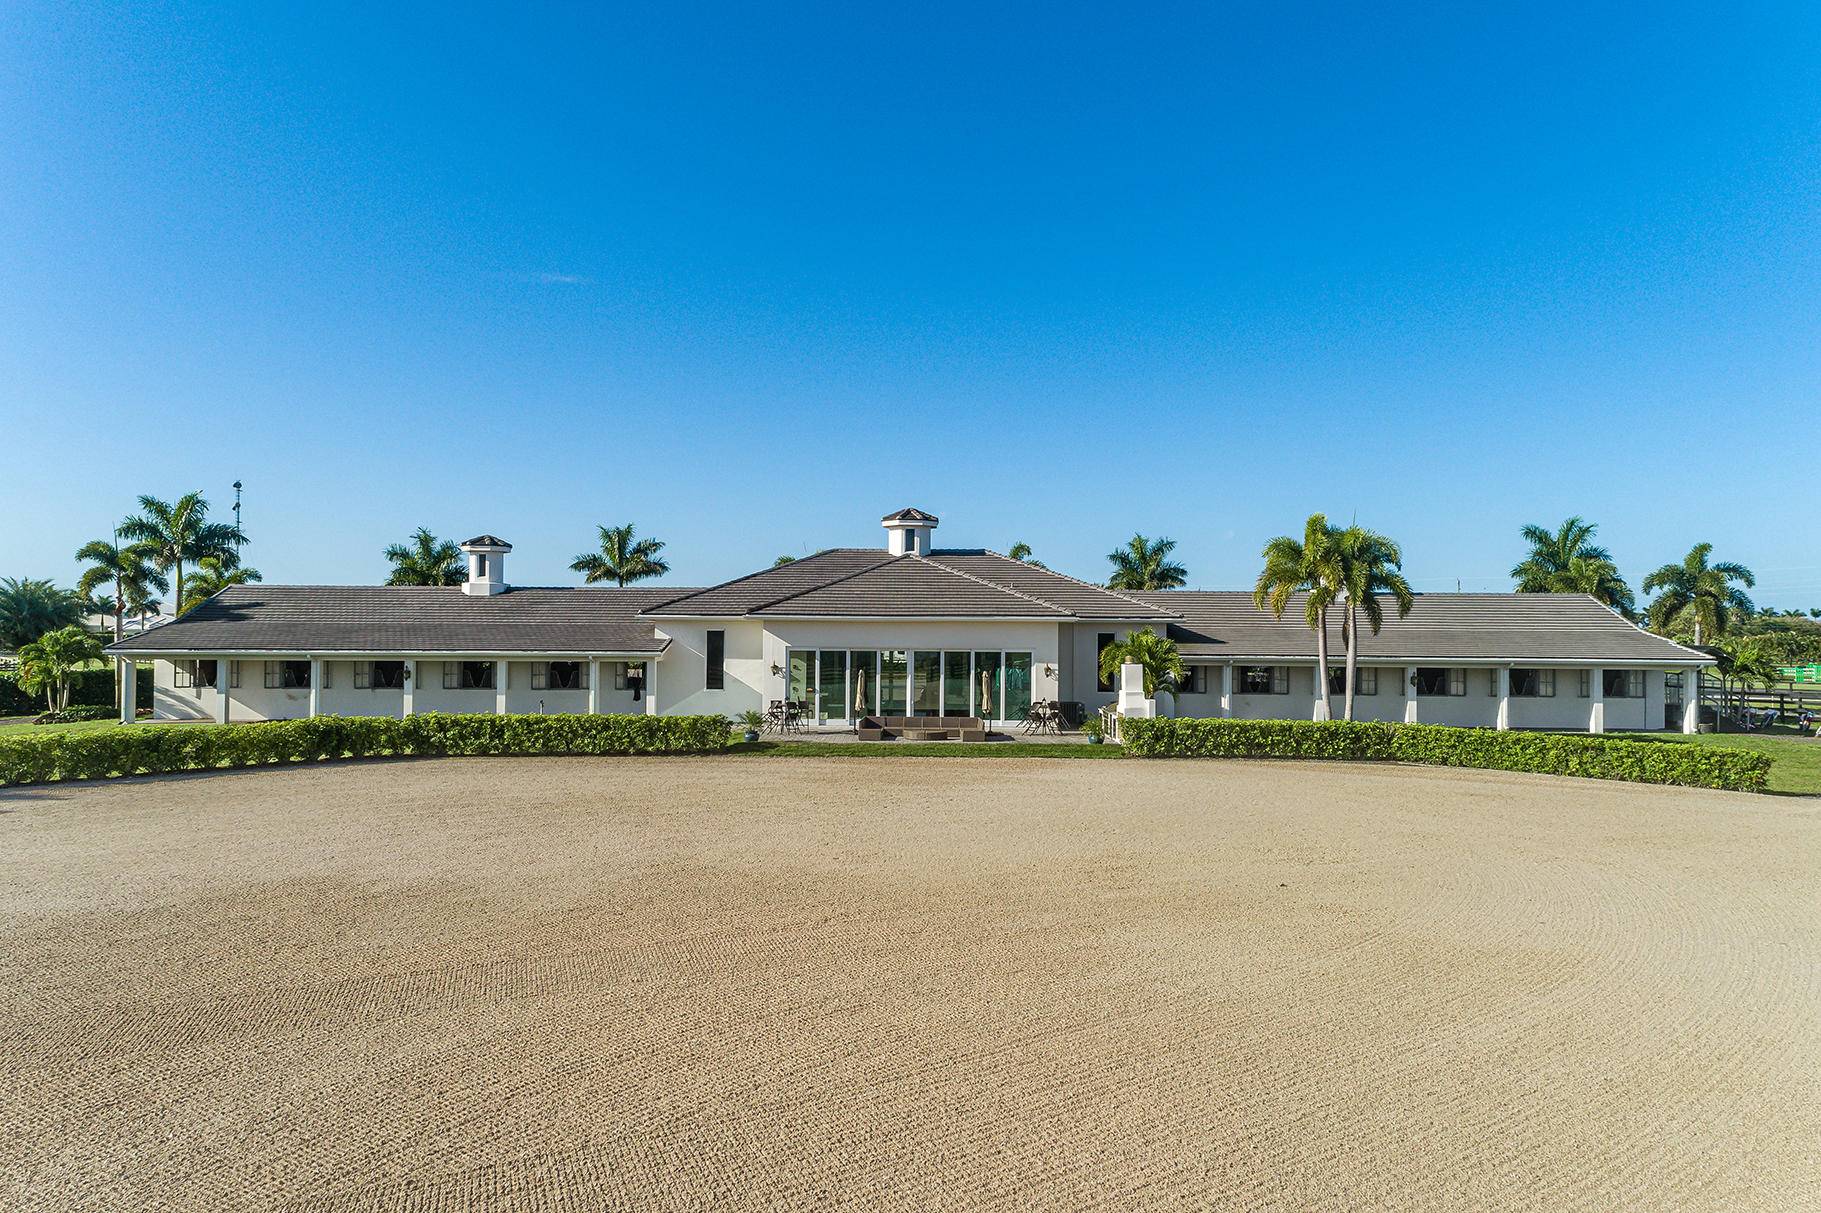 8. 4 acres. Prime location in the Grand Prix Village South, conveniently located within hacking distance to Palm Beach International Equestrian Center.